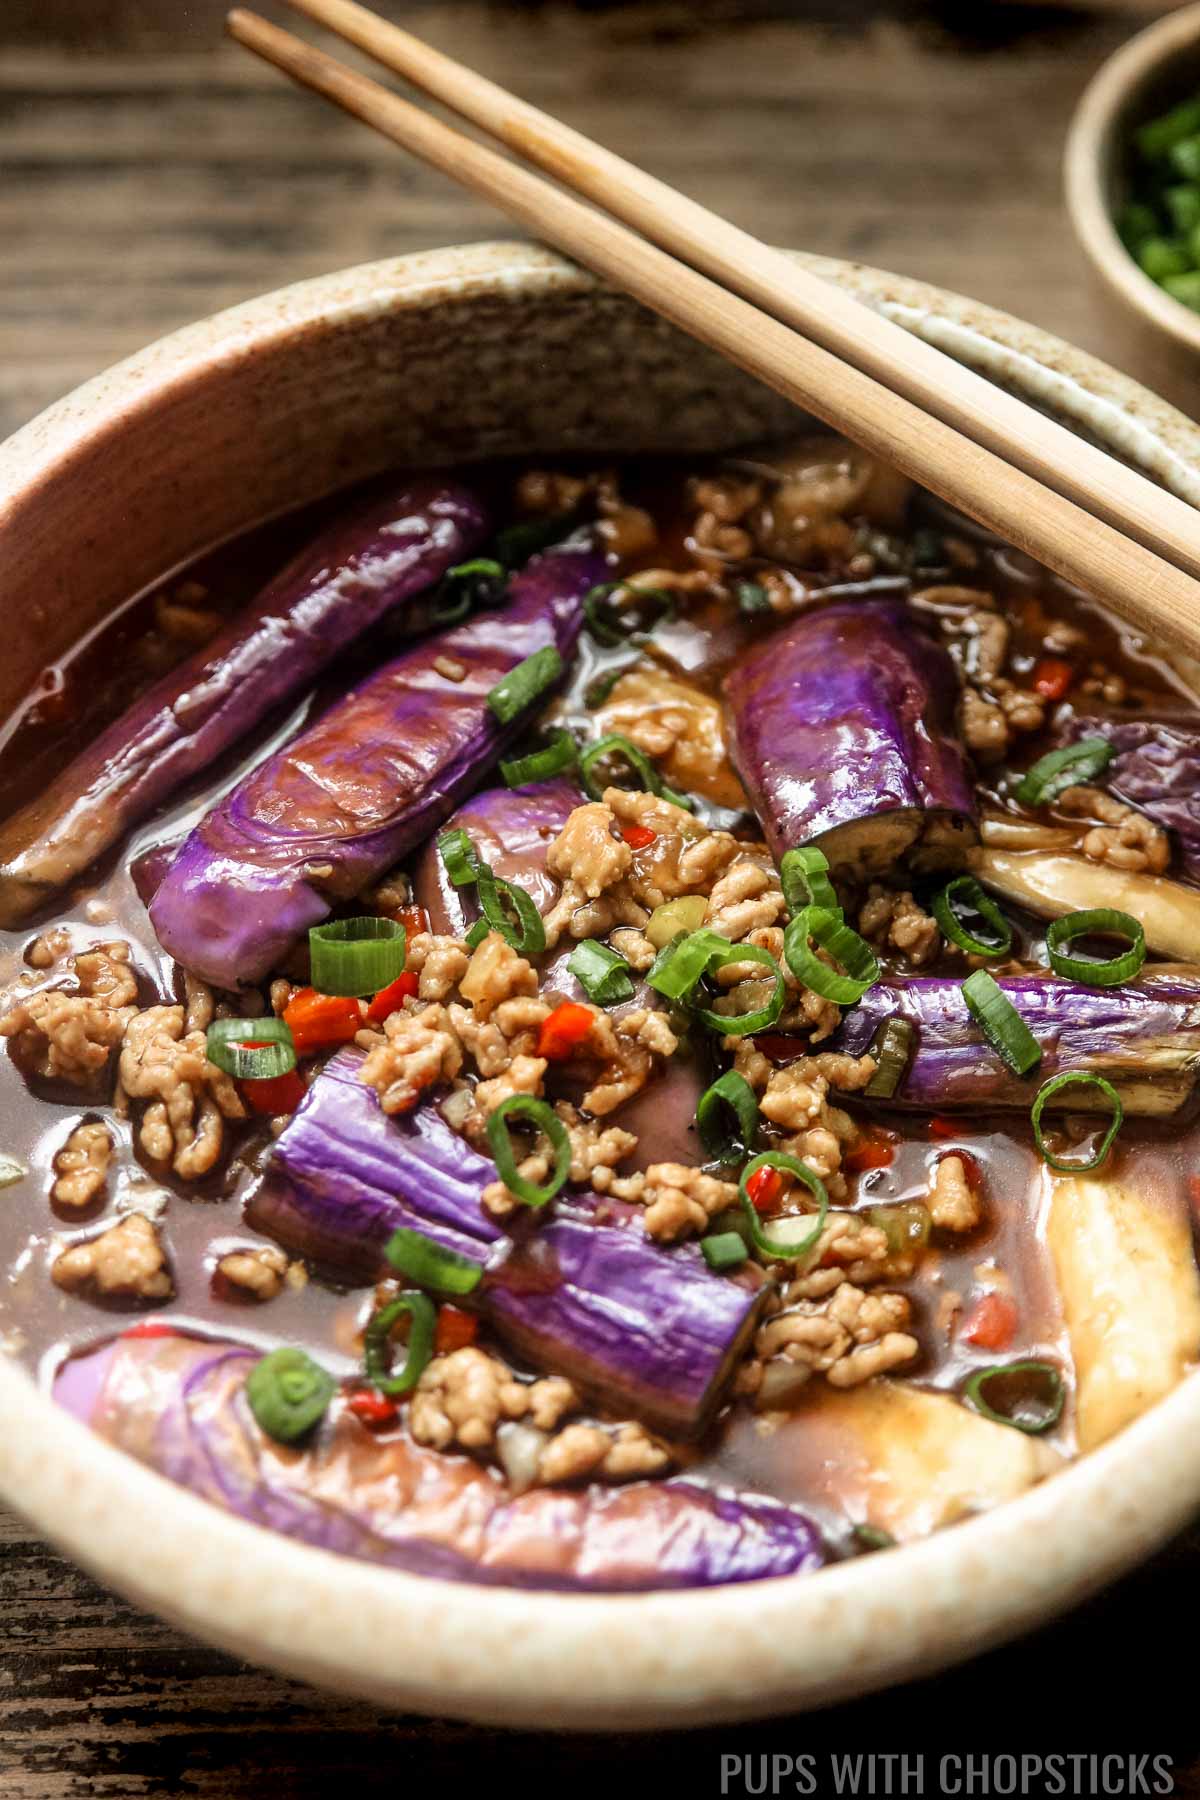 Chinese eggplant with garlic sauce served with green onions on the side placed in a large bowl